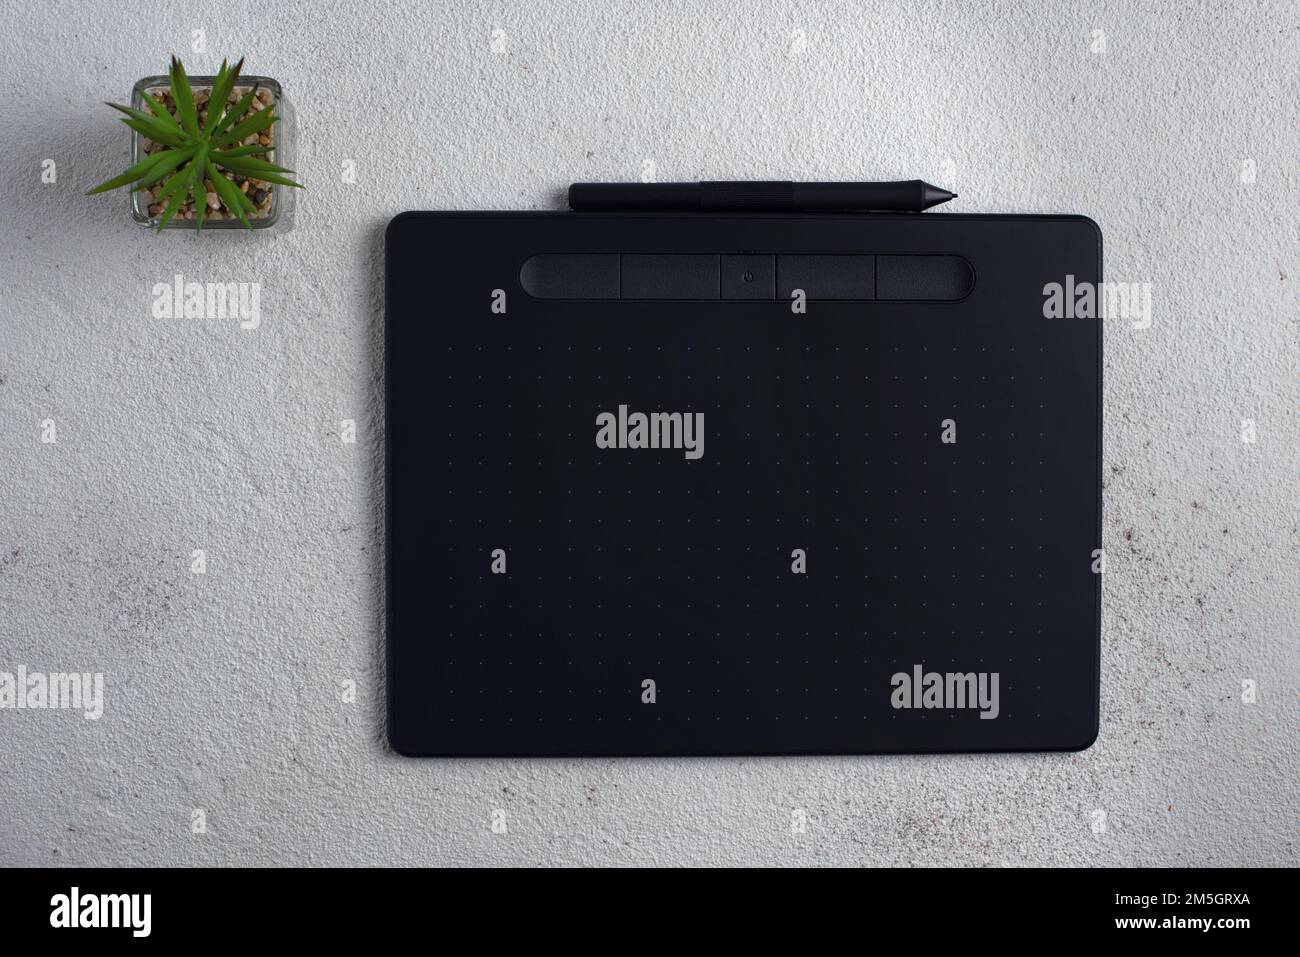 The graphic tablet with a stylus on a white background. There is a plant in a glass pot nearby. Stock Photo